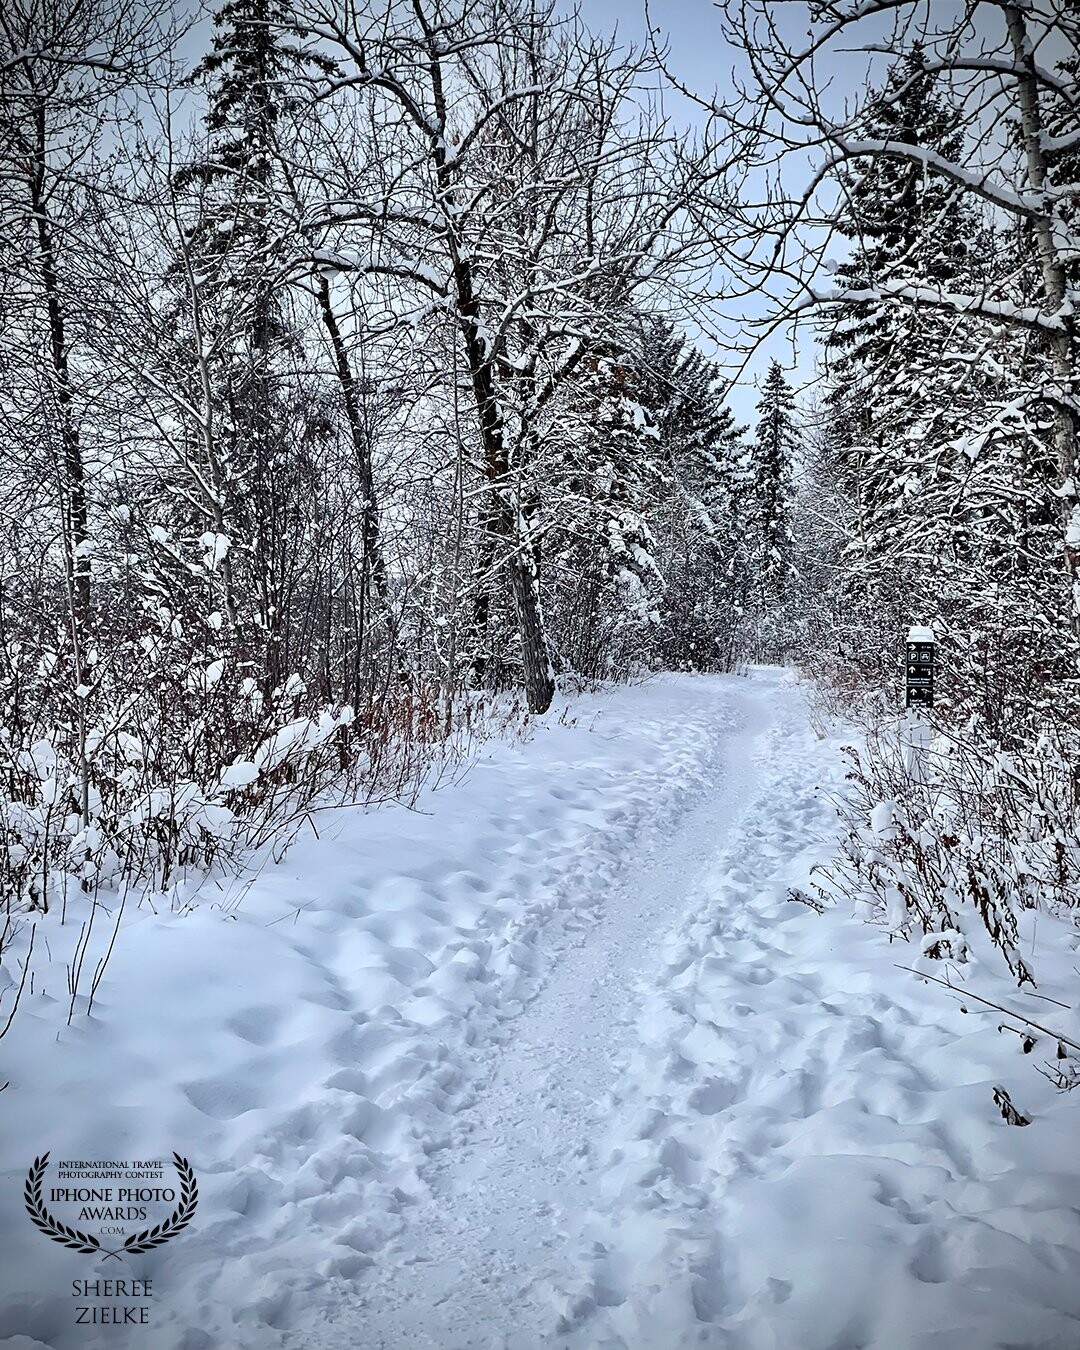 A cold and snowy day in Edmonton, Alberta. We were driving through a local park near our city’s river. We pulled over so I could take a better look around. A short walk in and I found this magical winter pathway, well-trodden, but completely deserted that day.